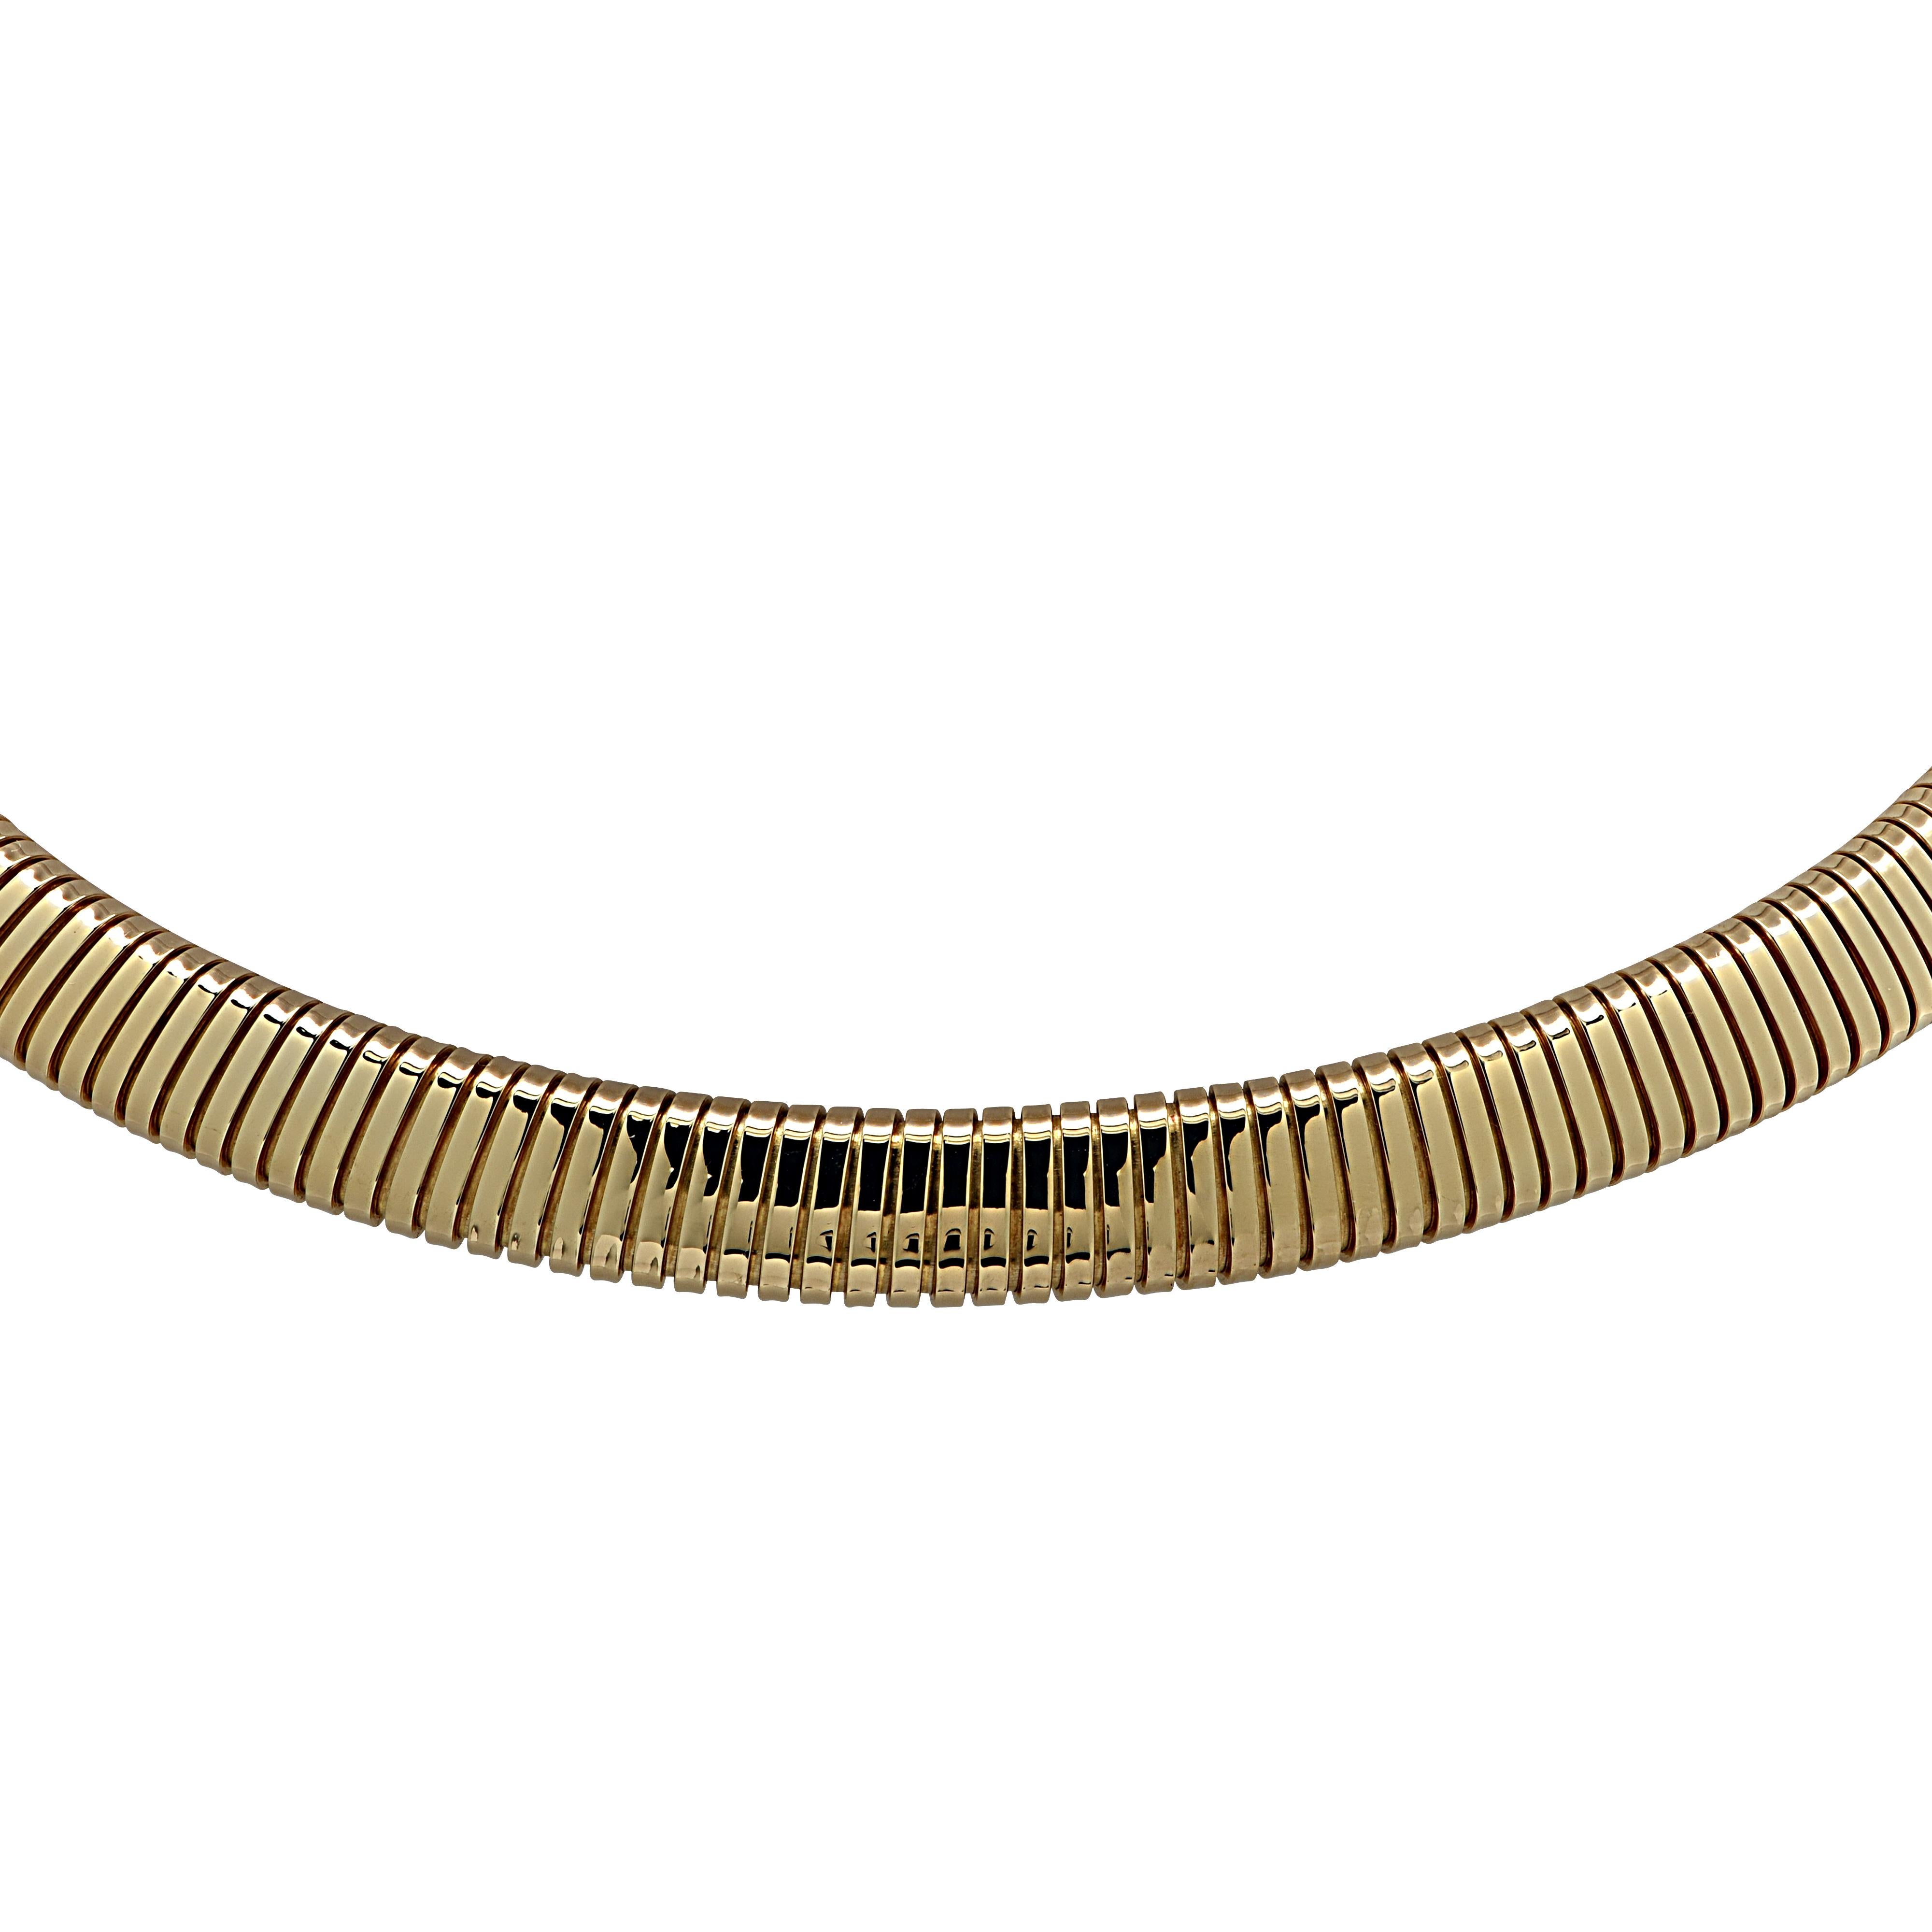 From the legendary House of Van Cleef & Arpels, this timelessly elegant collar necklace, crafted in 18 karat yellow gold, glides smoothly around the neck and rests silkily on the collar bone. This necklace threads into a highly polished gold plate